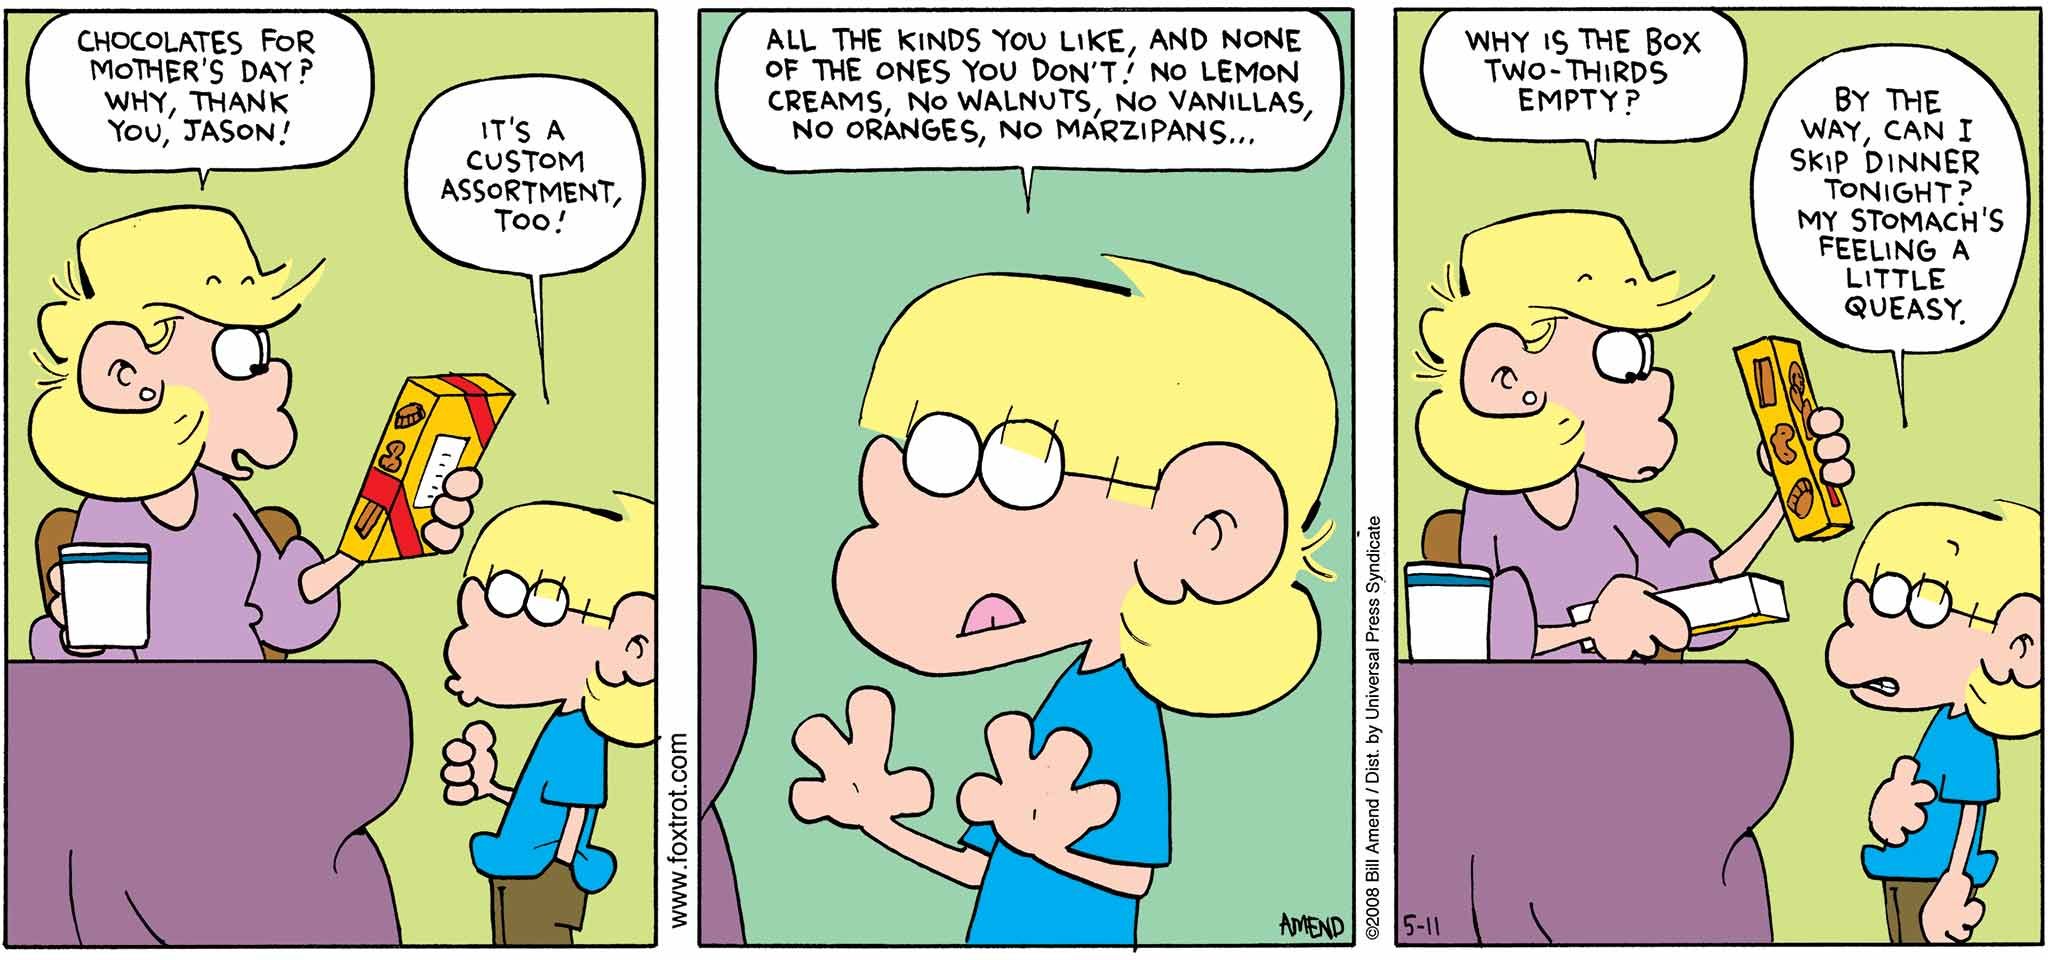 FoxTrot by Bill Amend - Mother's Day comic published May 11, 2008 - Andy: Chocolates for Mother's Day? Why, thank you, Jason! Jason: It's a custom assortment, too! All the kinds you like, and none of the ones you don't! No lemon creams, no walnuts, no vanillas, no oranges, no marzipans... Andy: Why is the box two-thirds empty? Jason: By the way, can I skip dinner tonight? My stomach's feeling a little queasy.